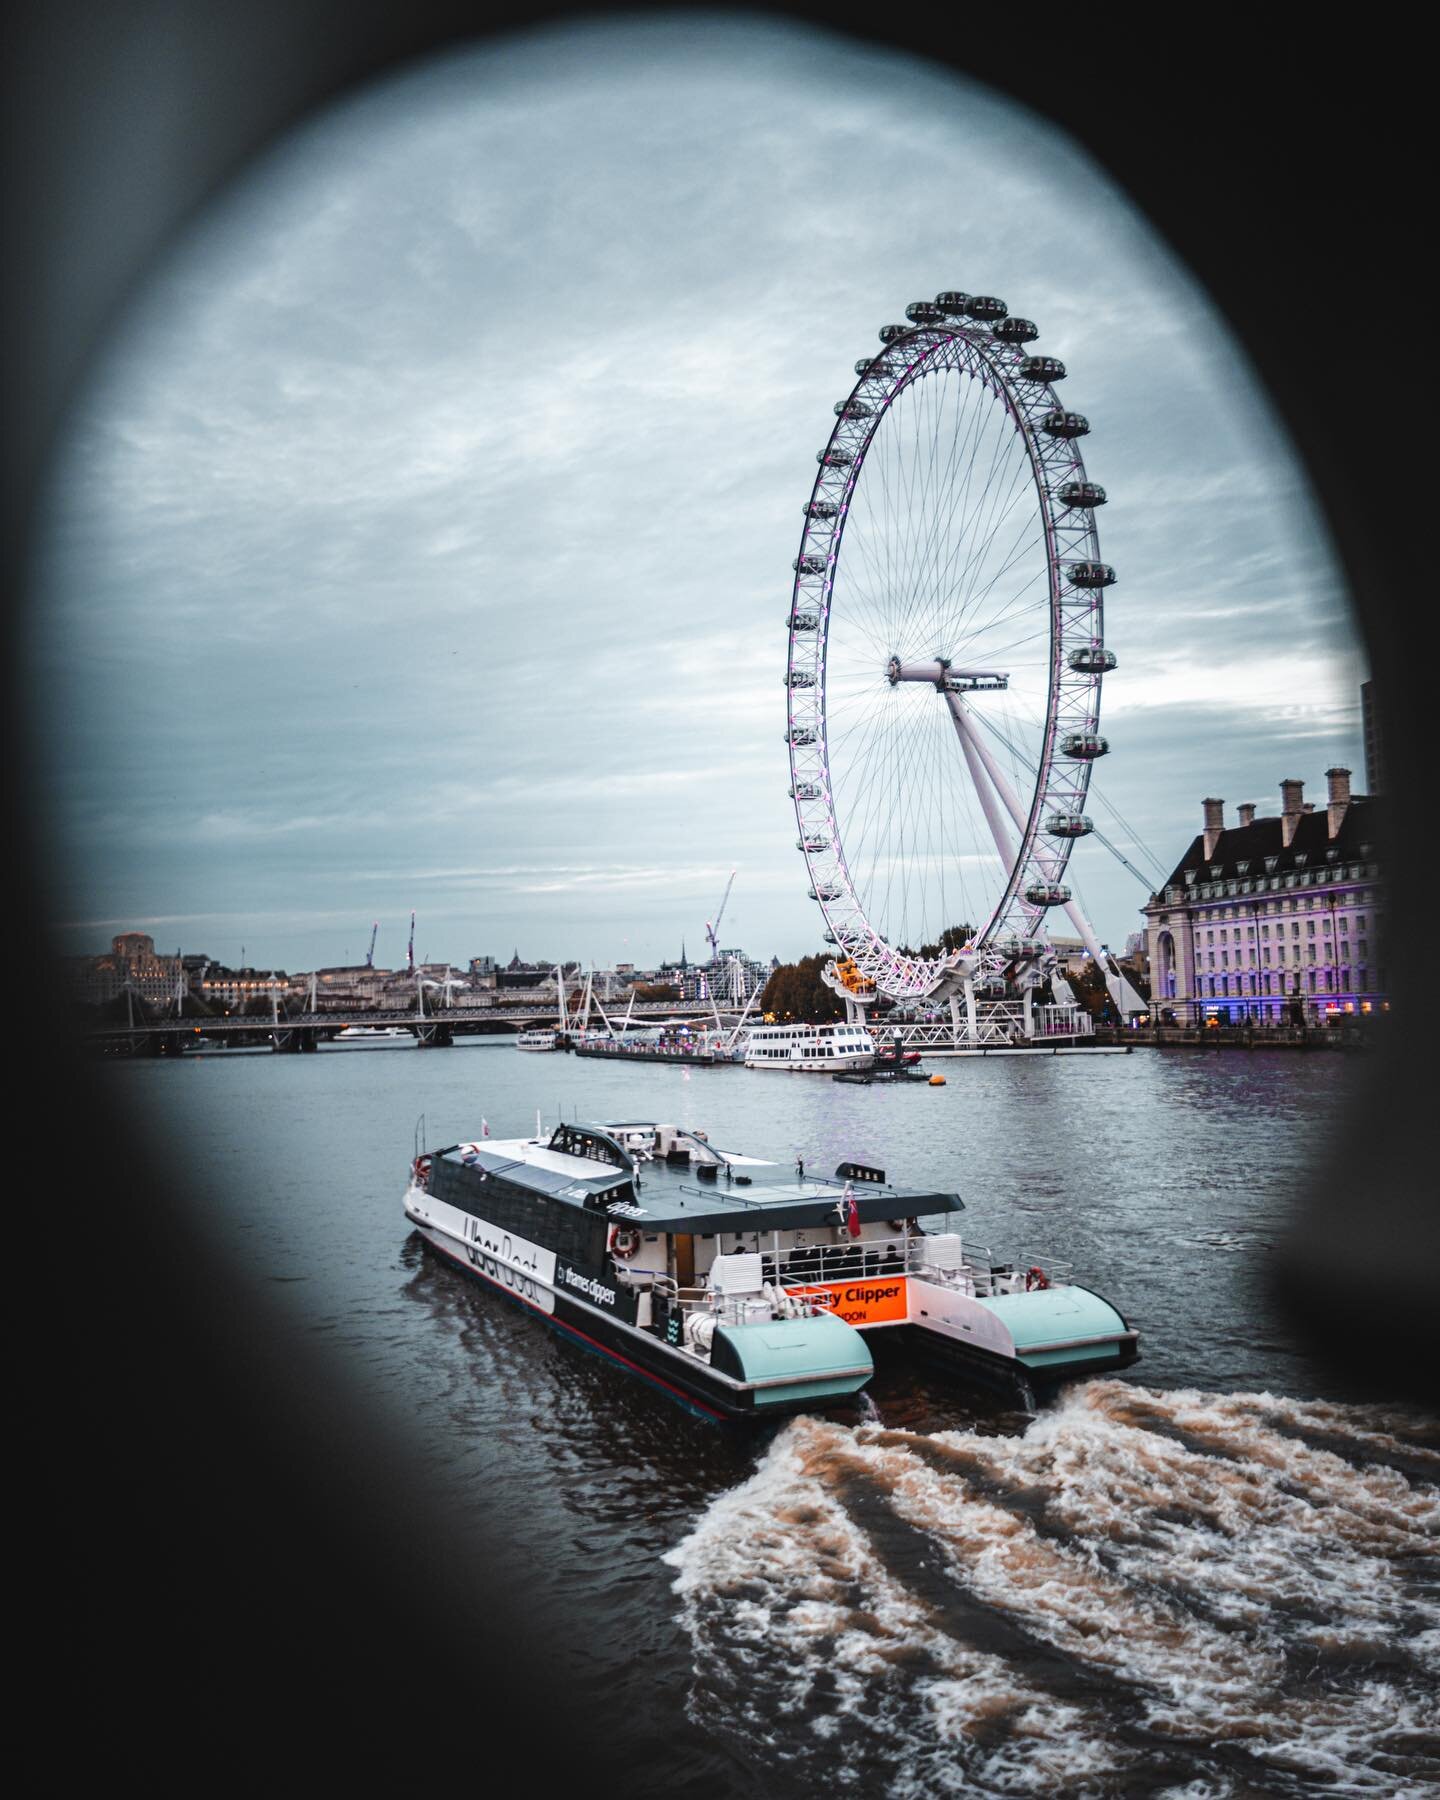 Yes that is an @uber boat. I was very surprised too when I saw it London. Too bad Big Ben is still under construction so for now we can enjoy the @londoneye 
.
Edited with my presets, linked in the bio.
.
#canonshooter #photography #london #england #